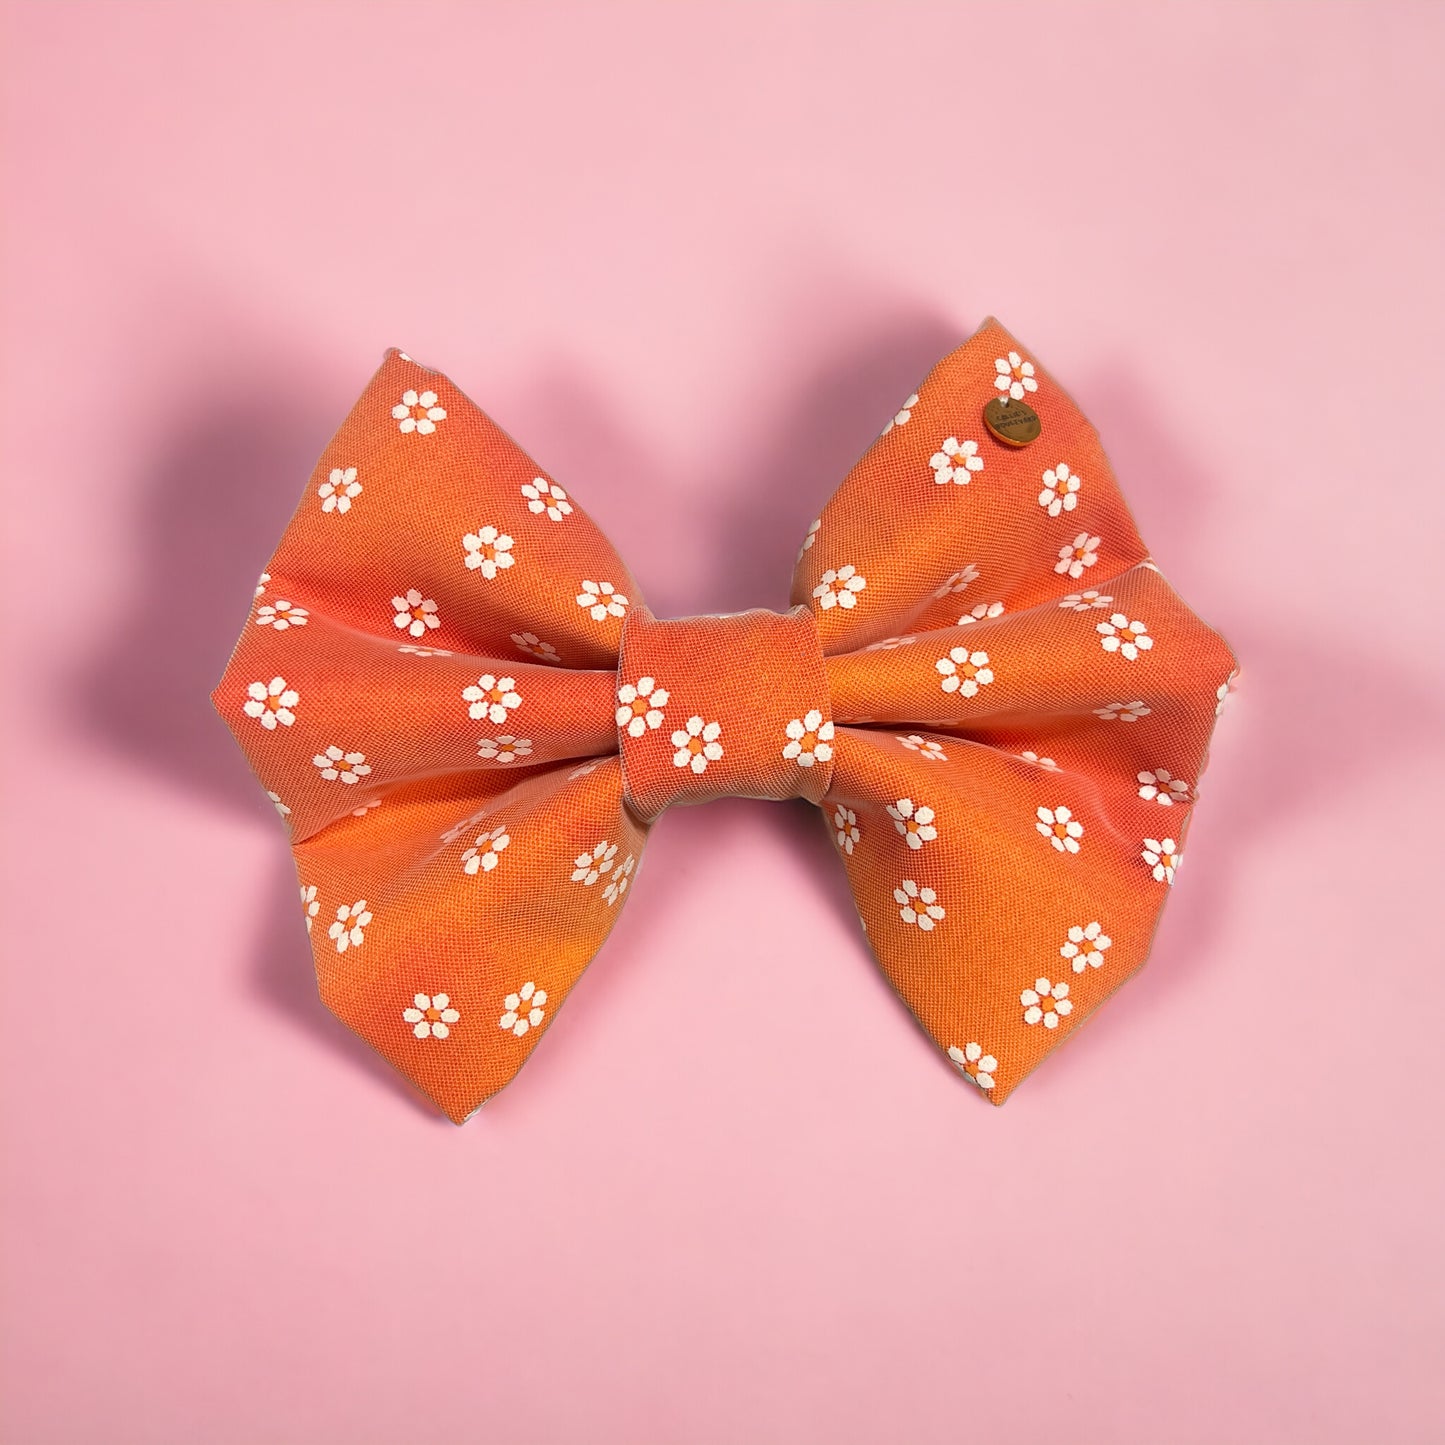 The Daisy Bow Tie | Essence of Spring 🌼